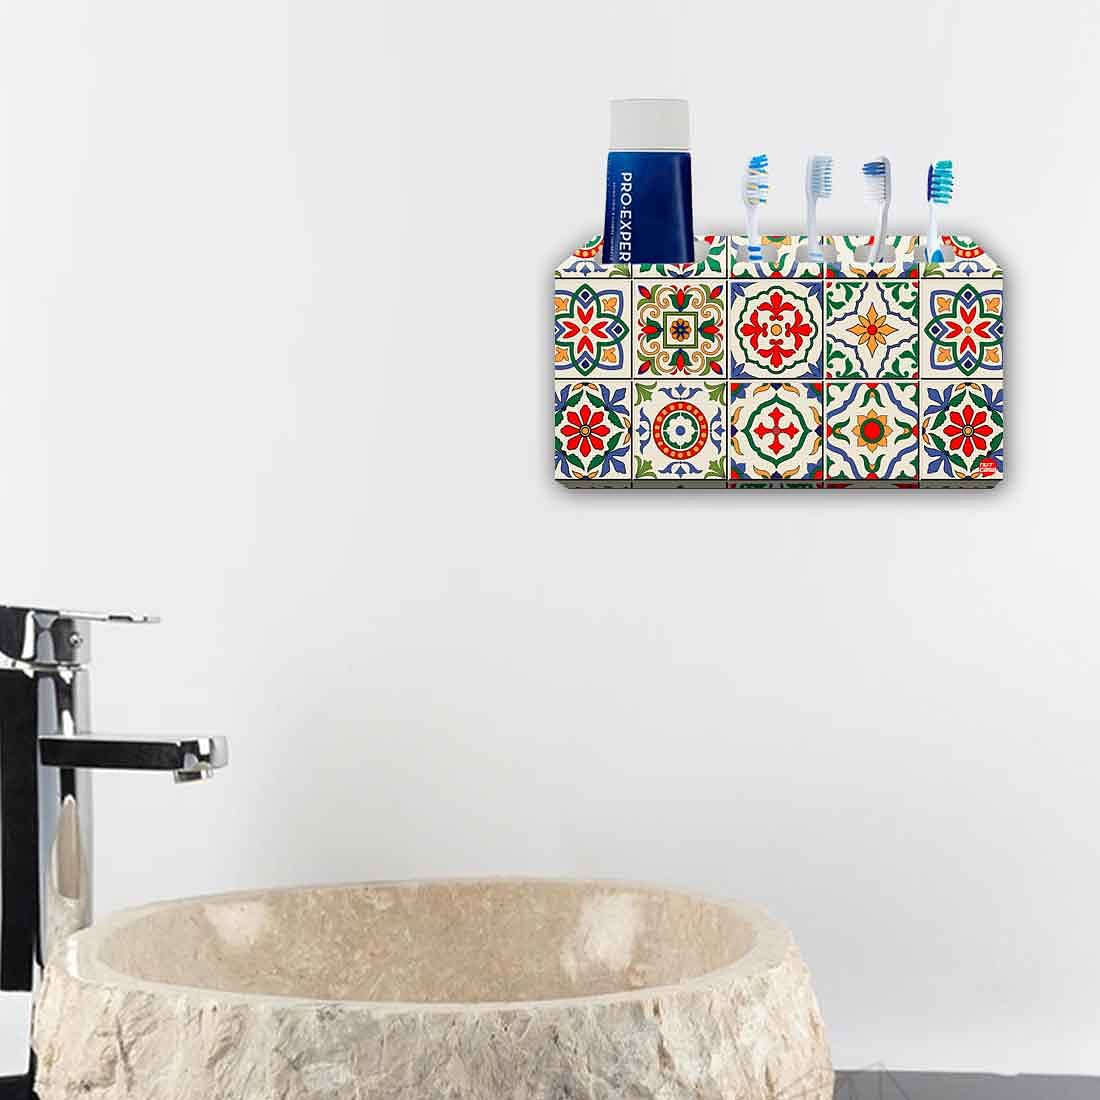 Toothbrush Holder Wall Mounted -Talavera Mexican Style Nutcase